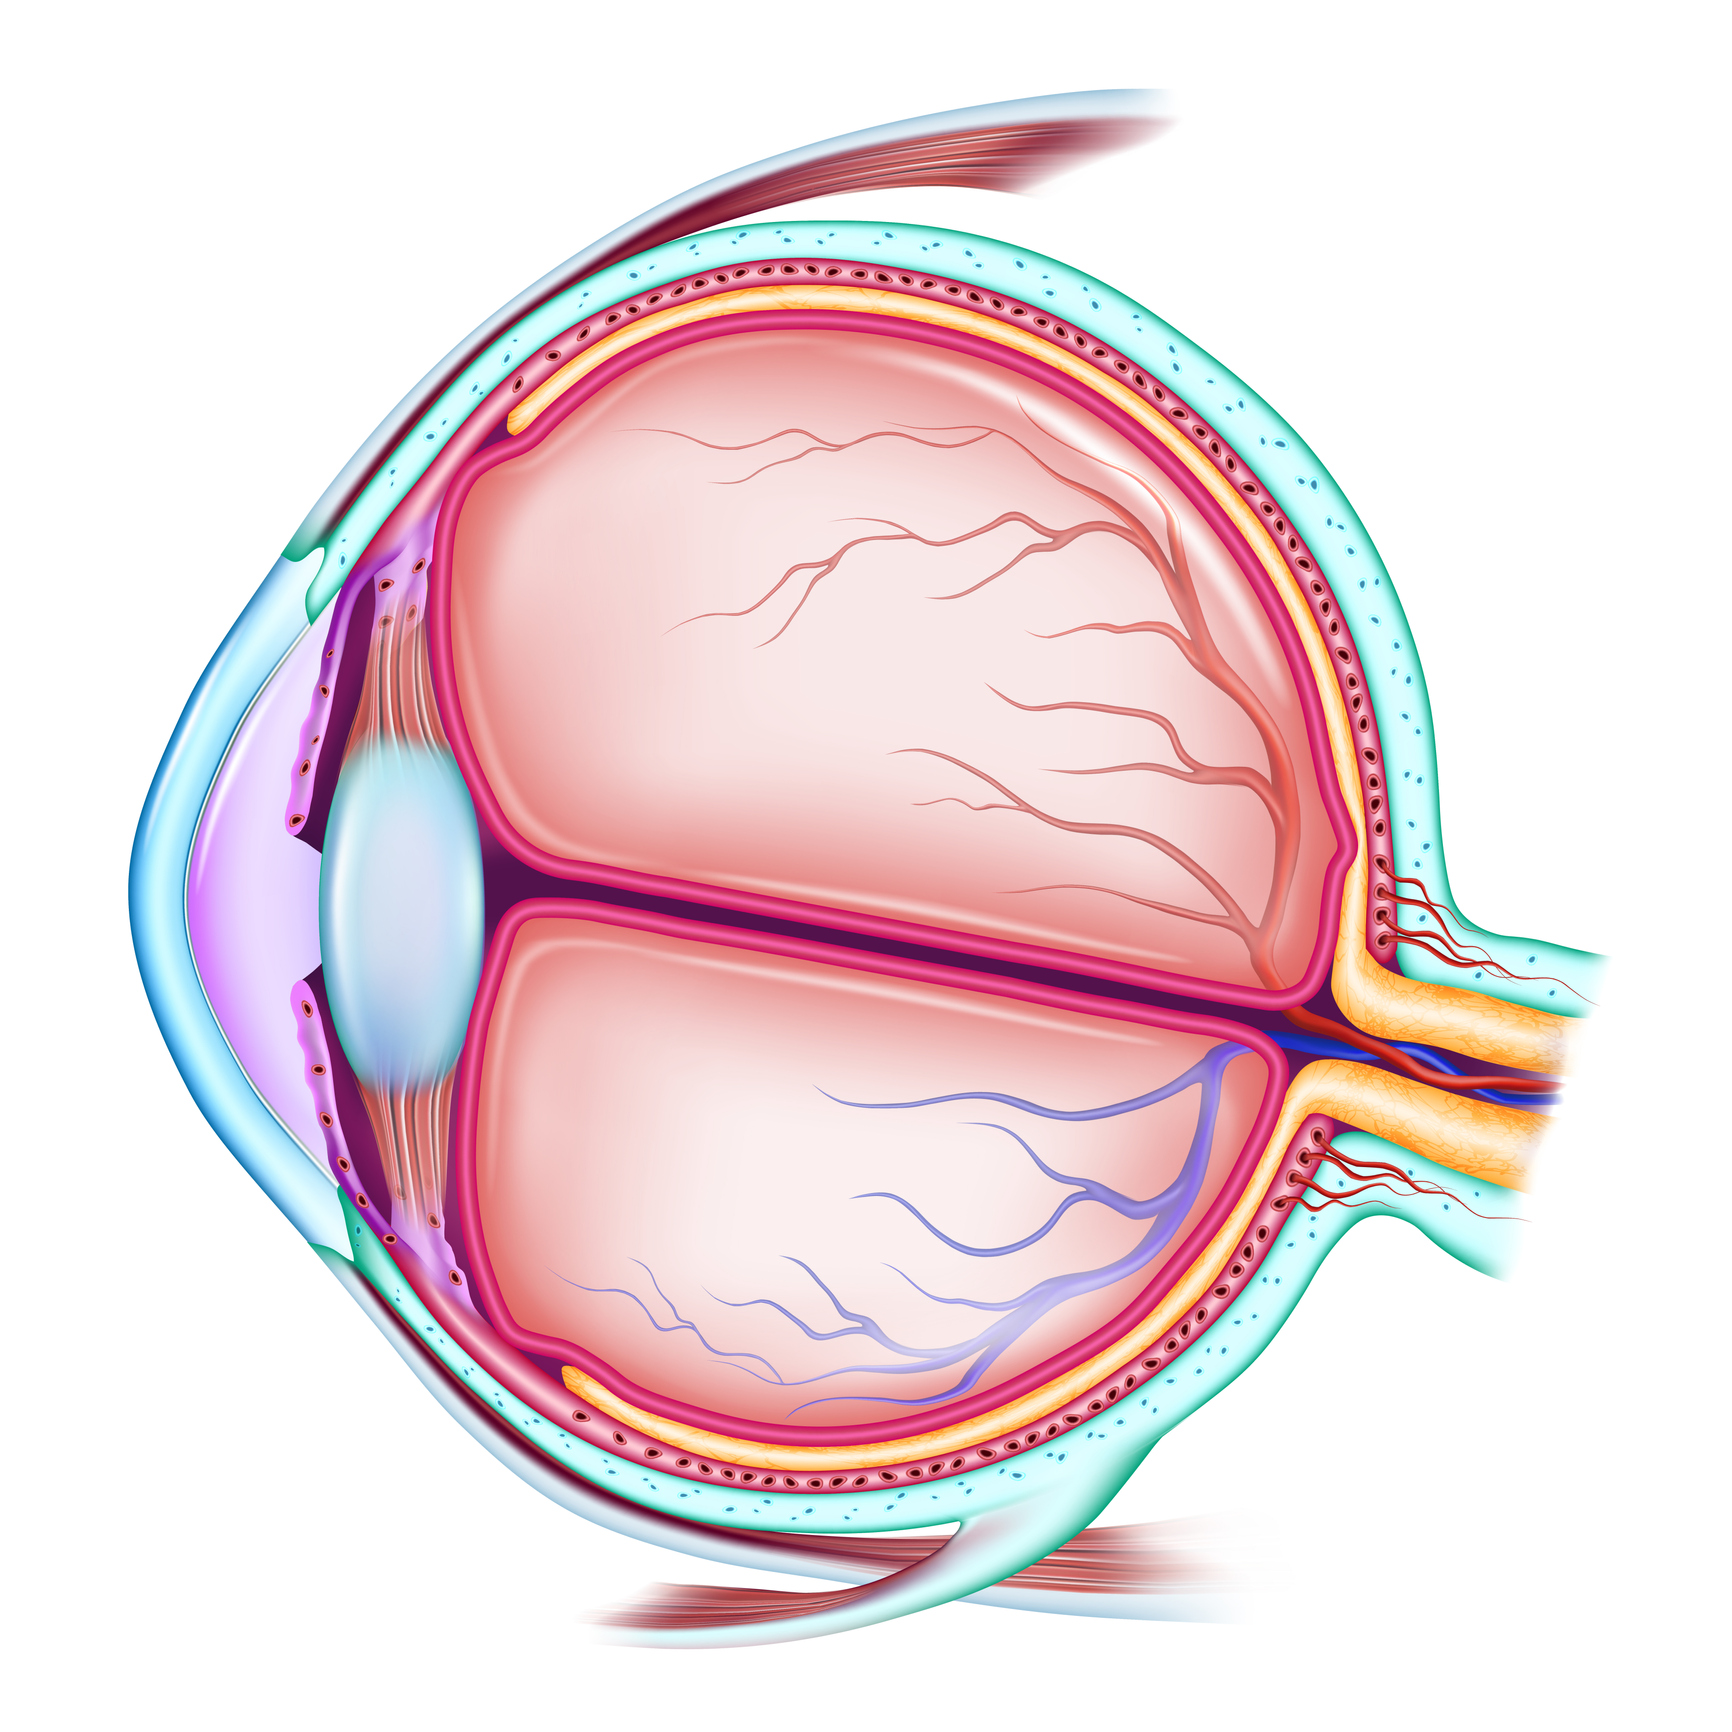 Structure of the human eyeball with the name and description of all sites. Medical didactic anatomy poster. Vector illustration isolated on a white background.